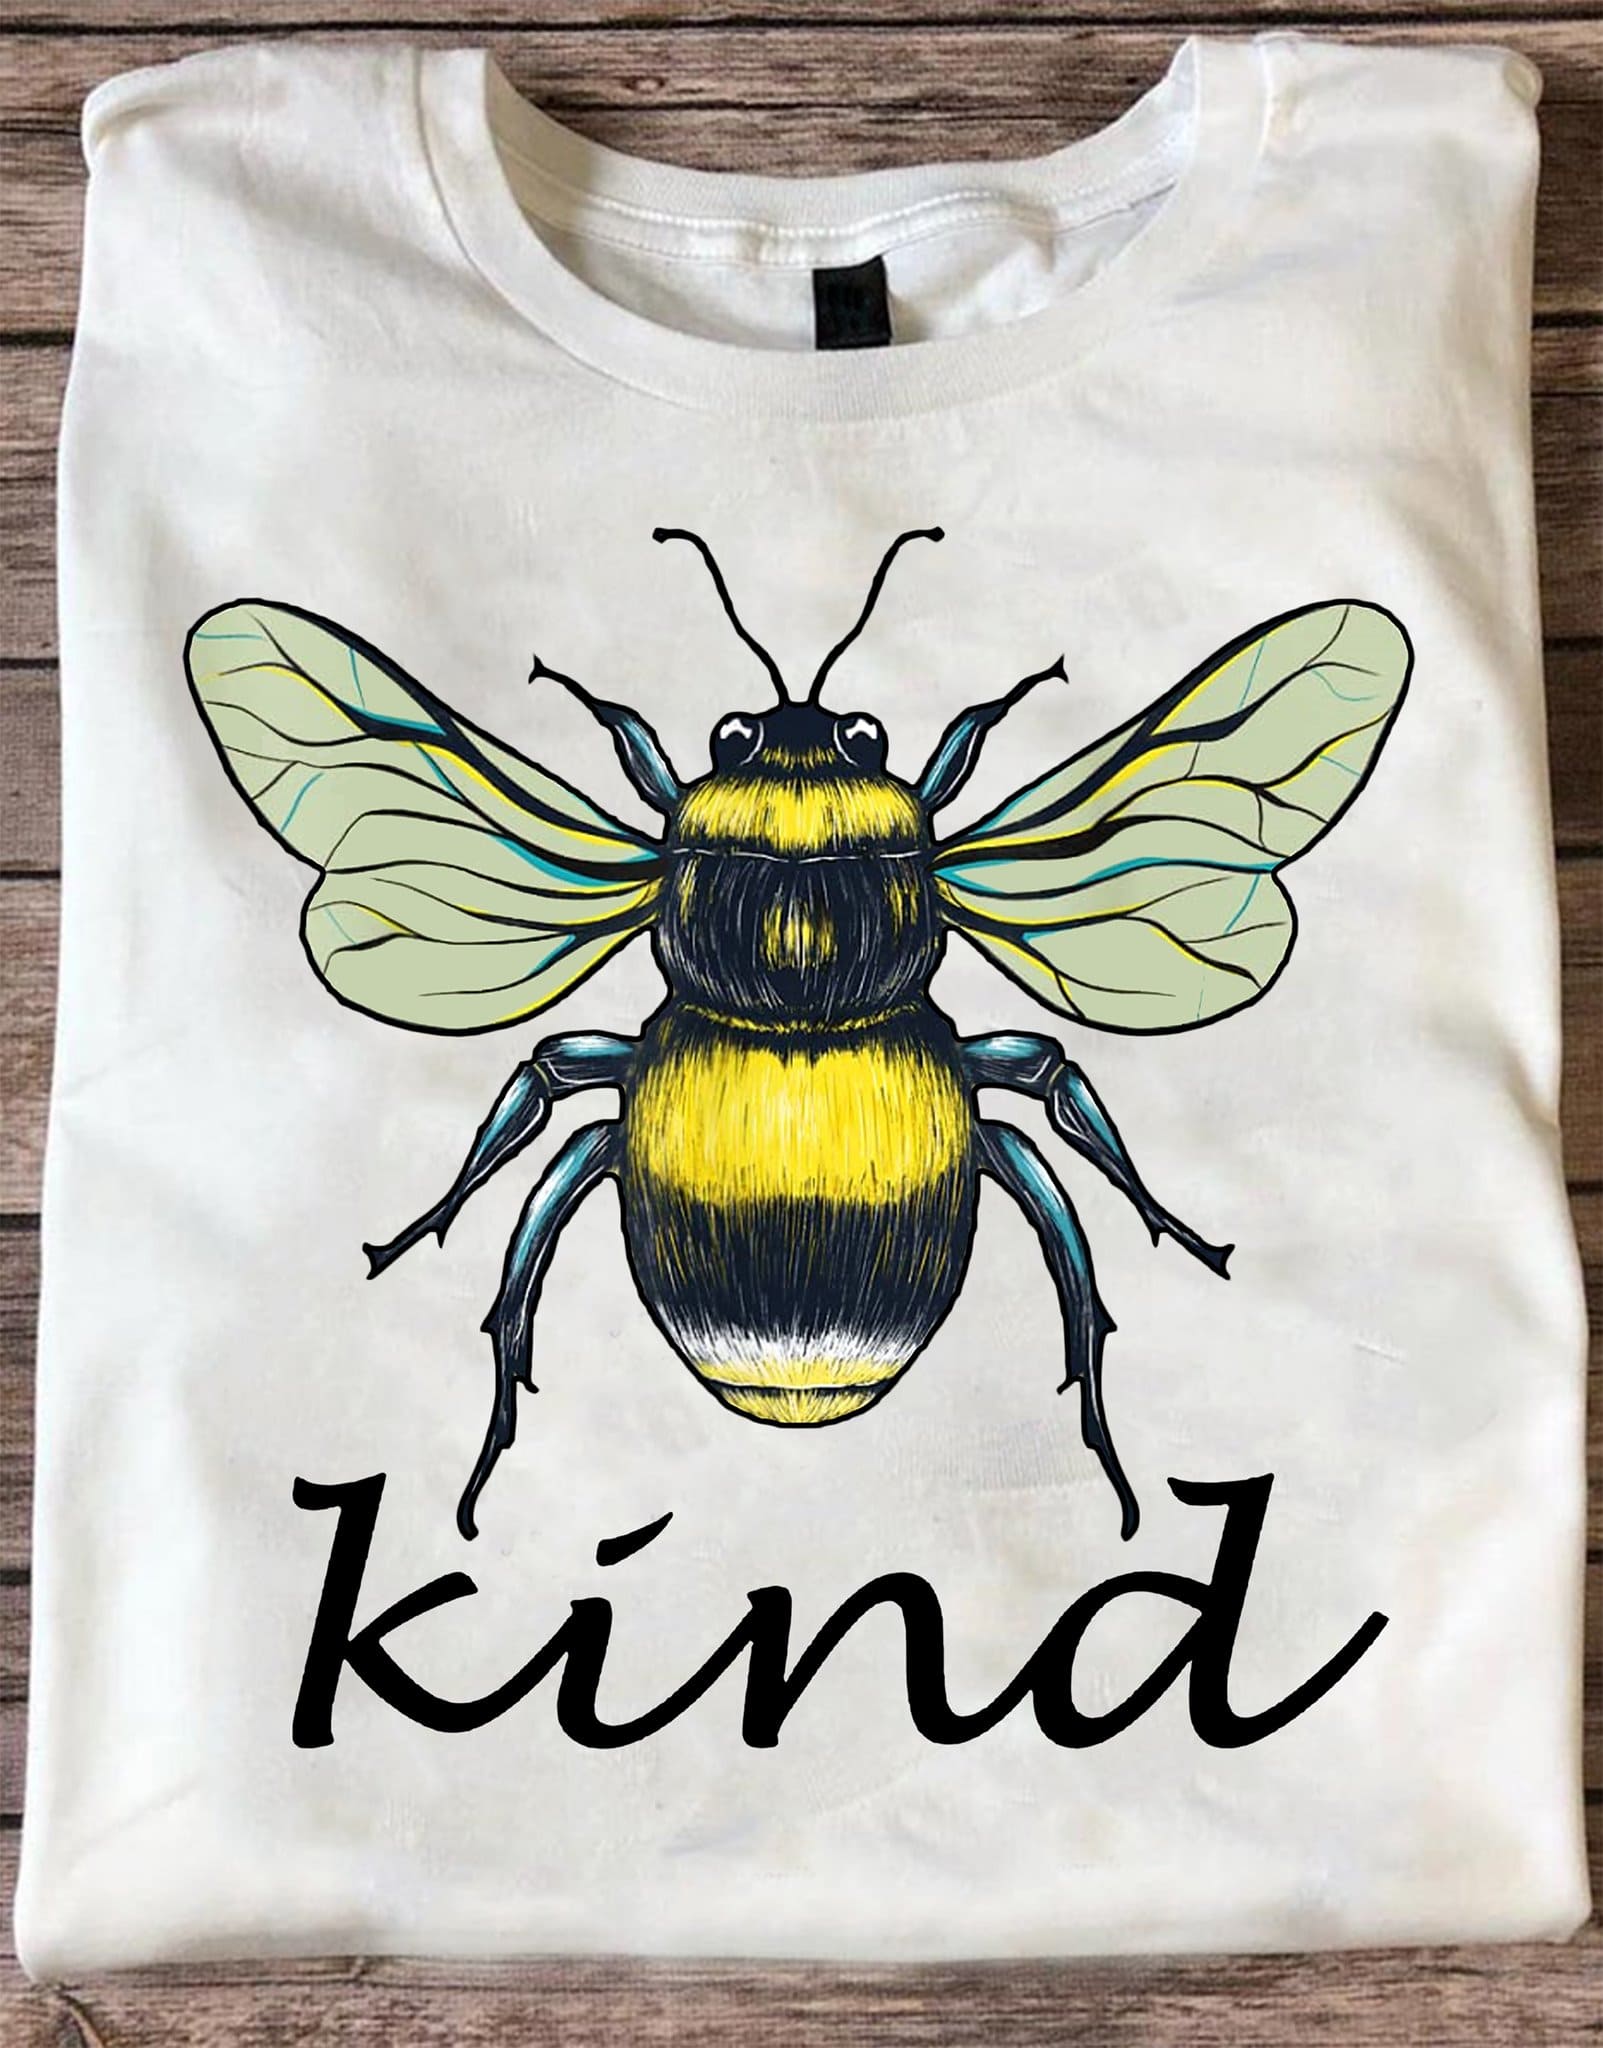 Bee kind - Be kind in life, spread kindness